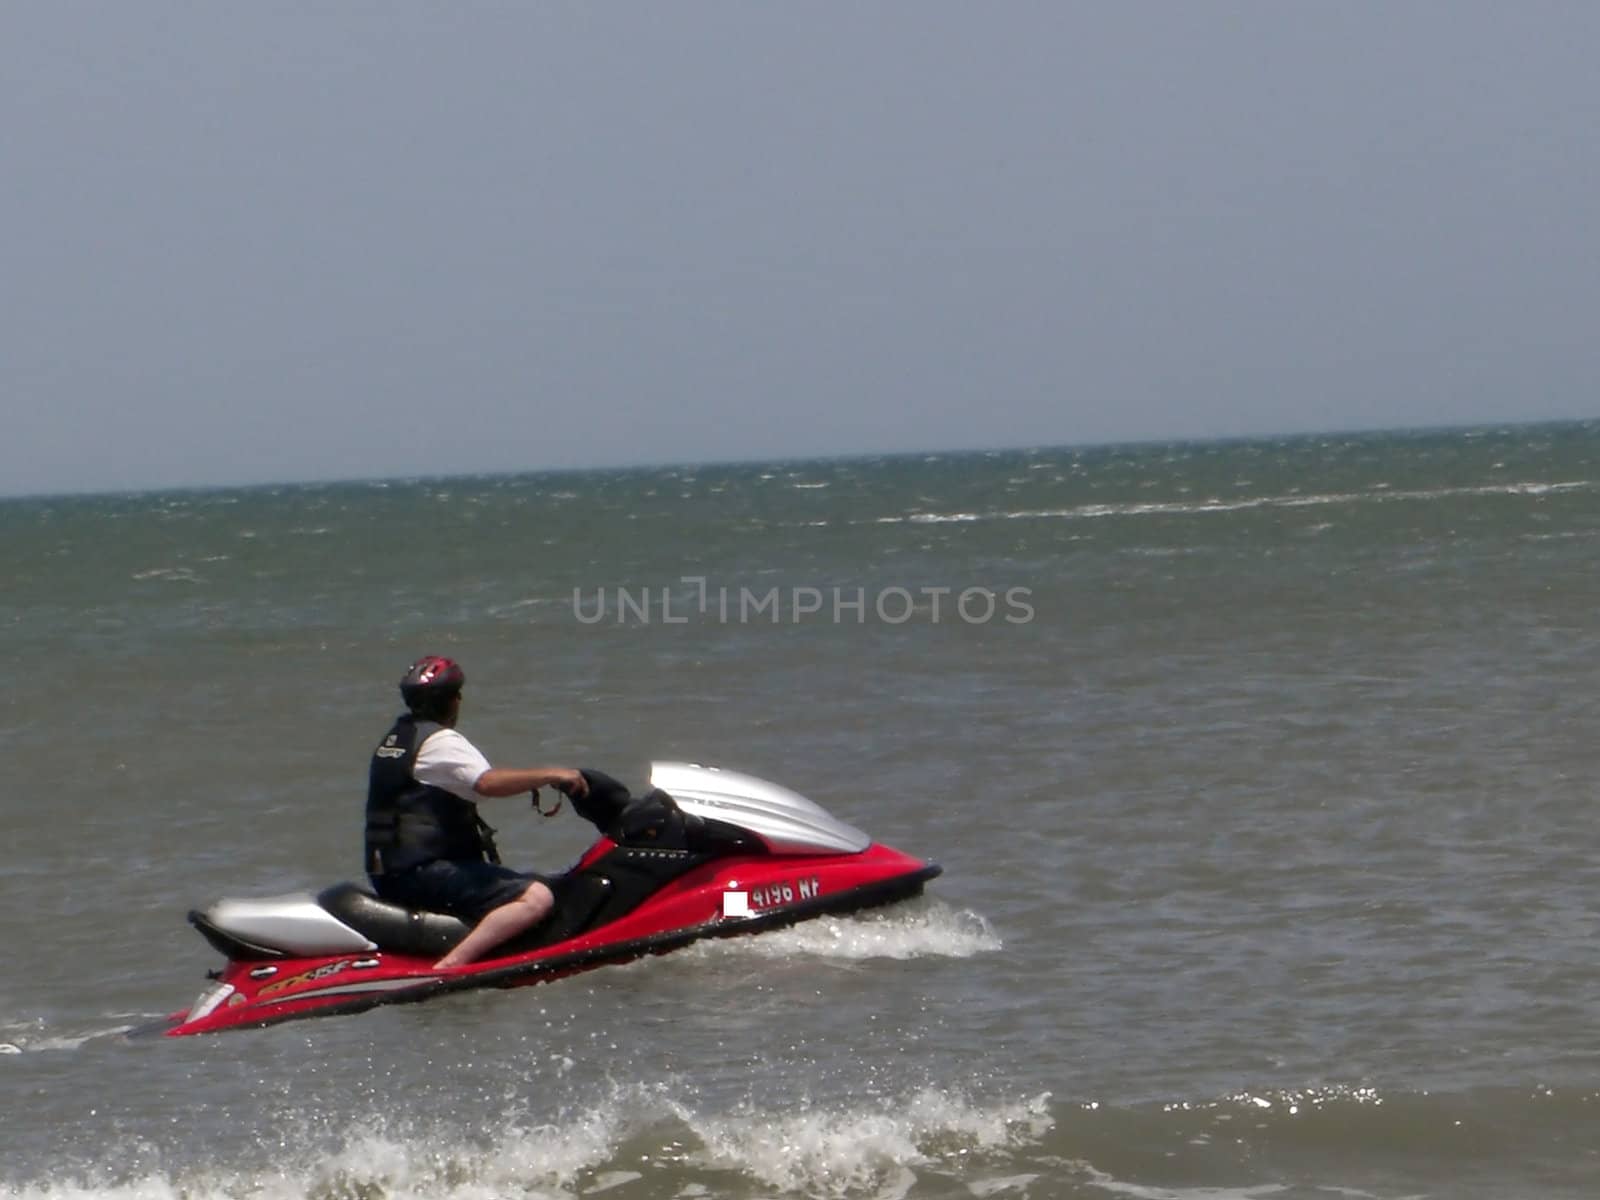 A man is wearing a safety vest and is riding a jetski in the ocean.